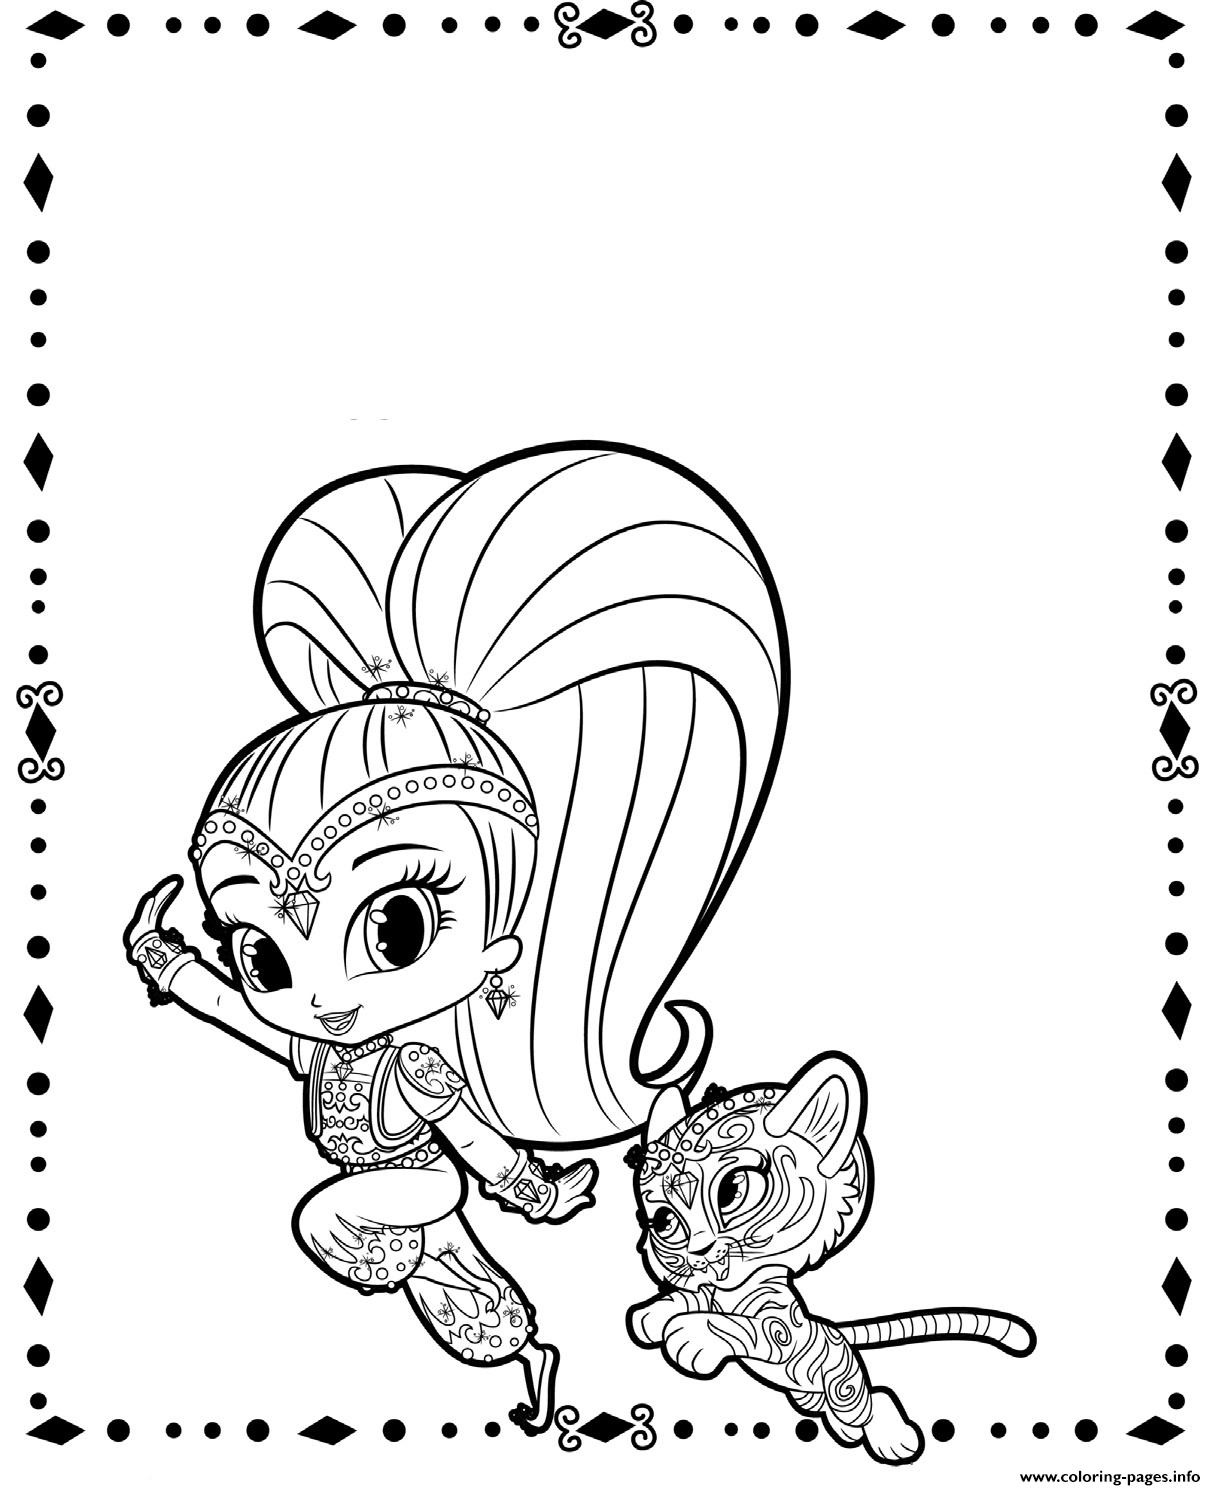 Shine And Tiger From Shimmer And Shine coloring pages